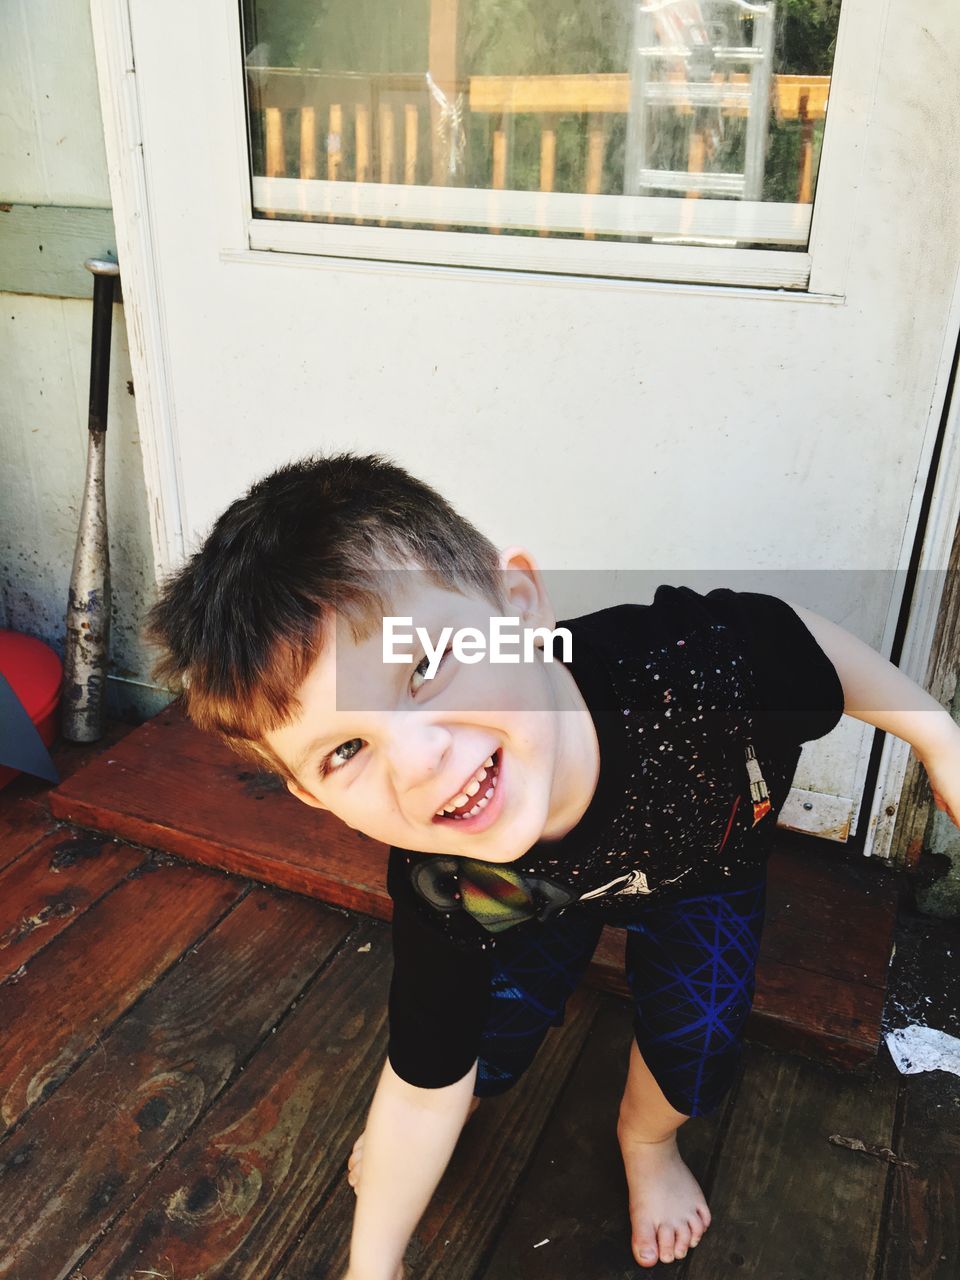 High angle view of boy making face while standing on hardwood floor